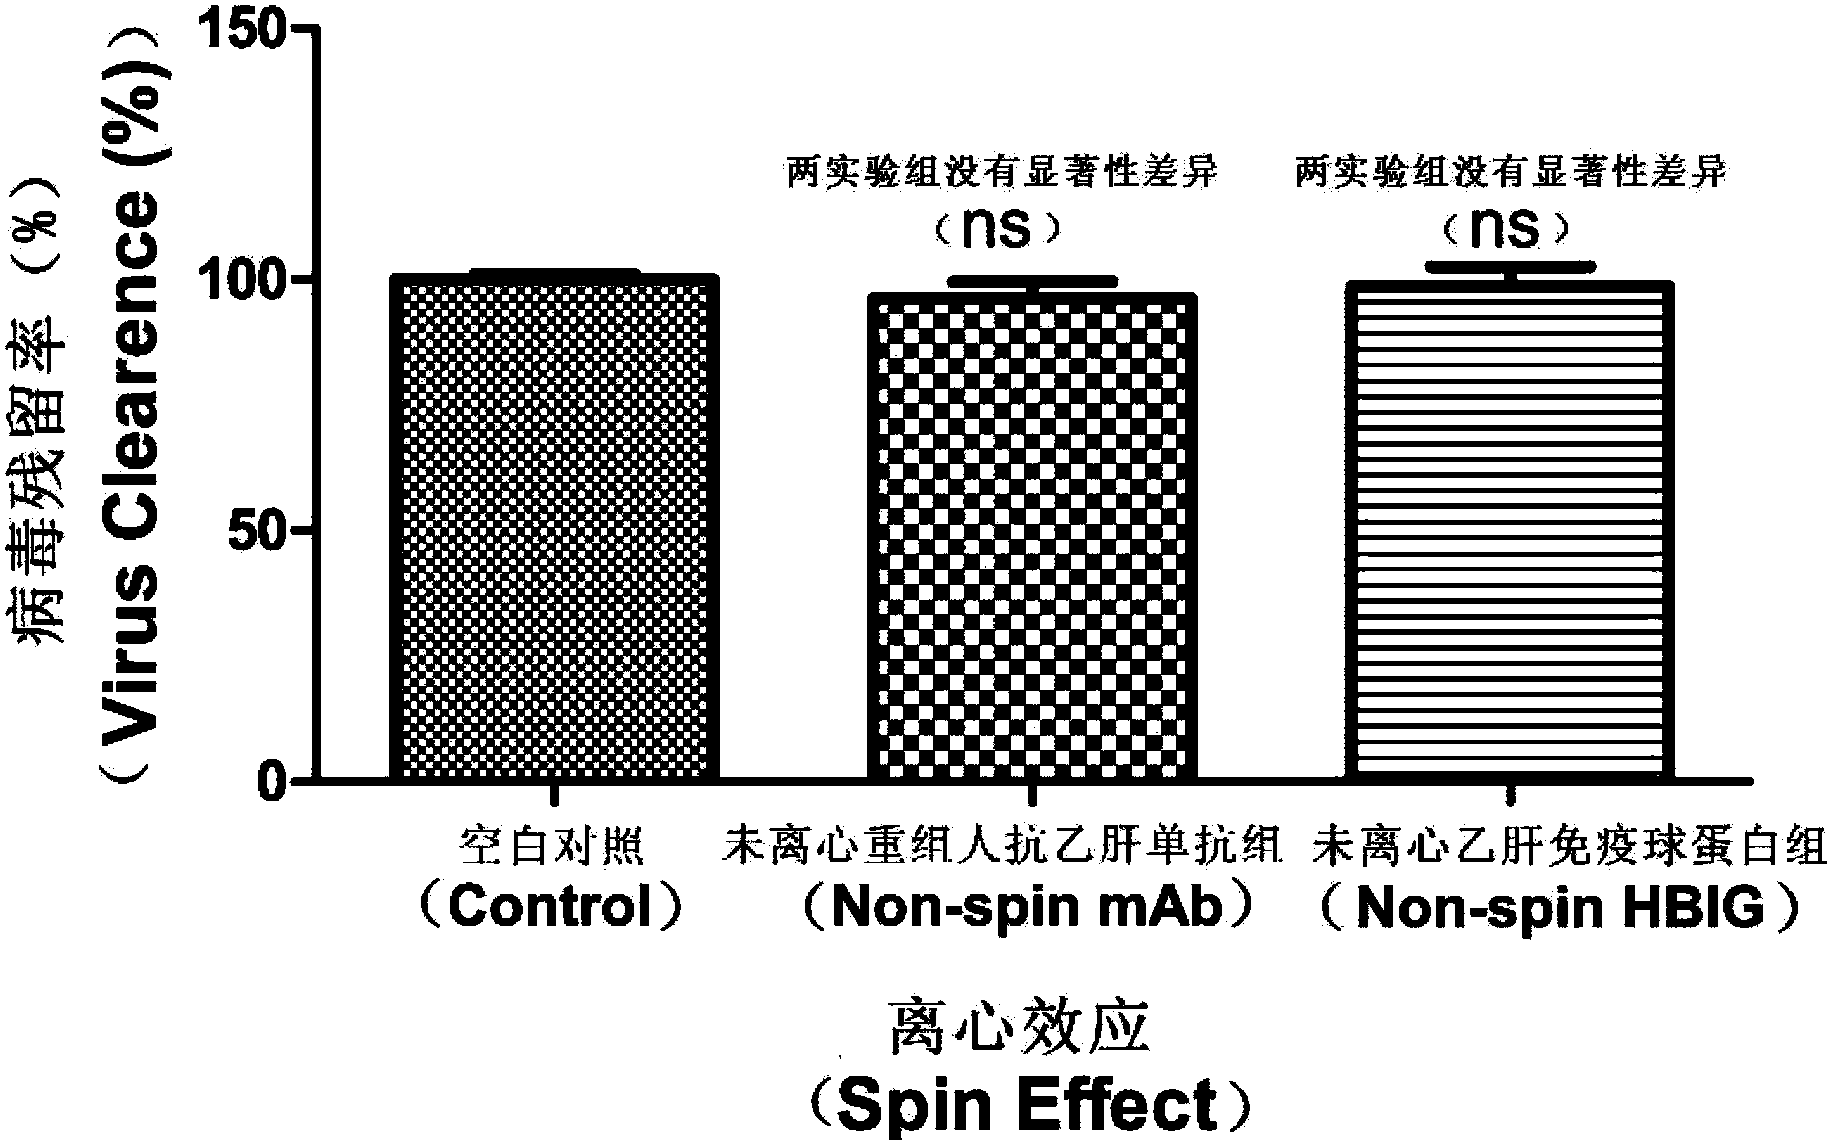 Method for detection and evaluation of anti-virus-infection activity